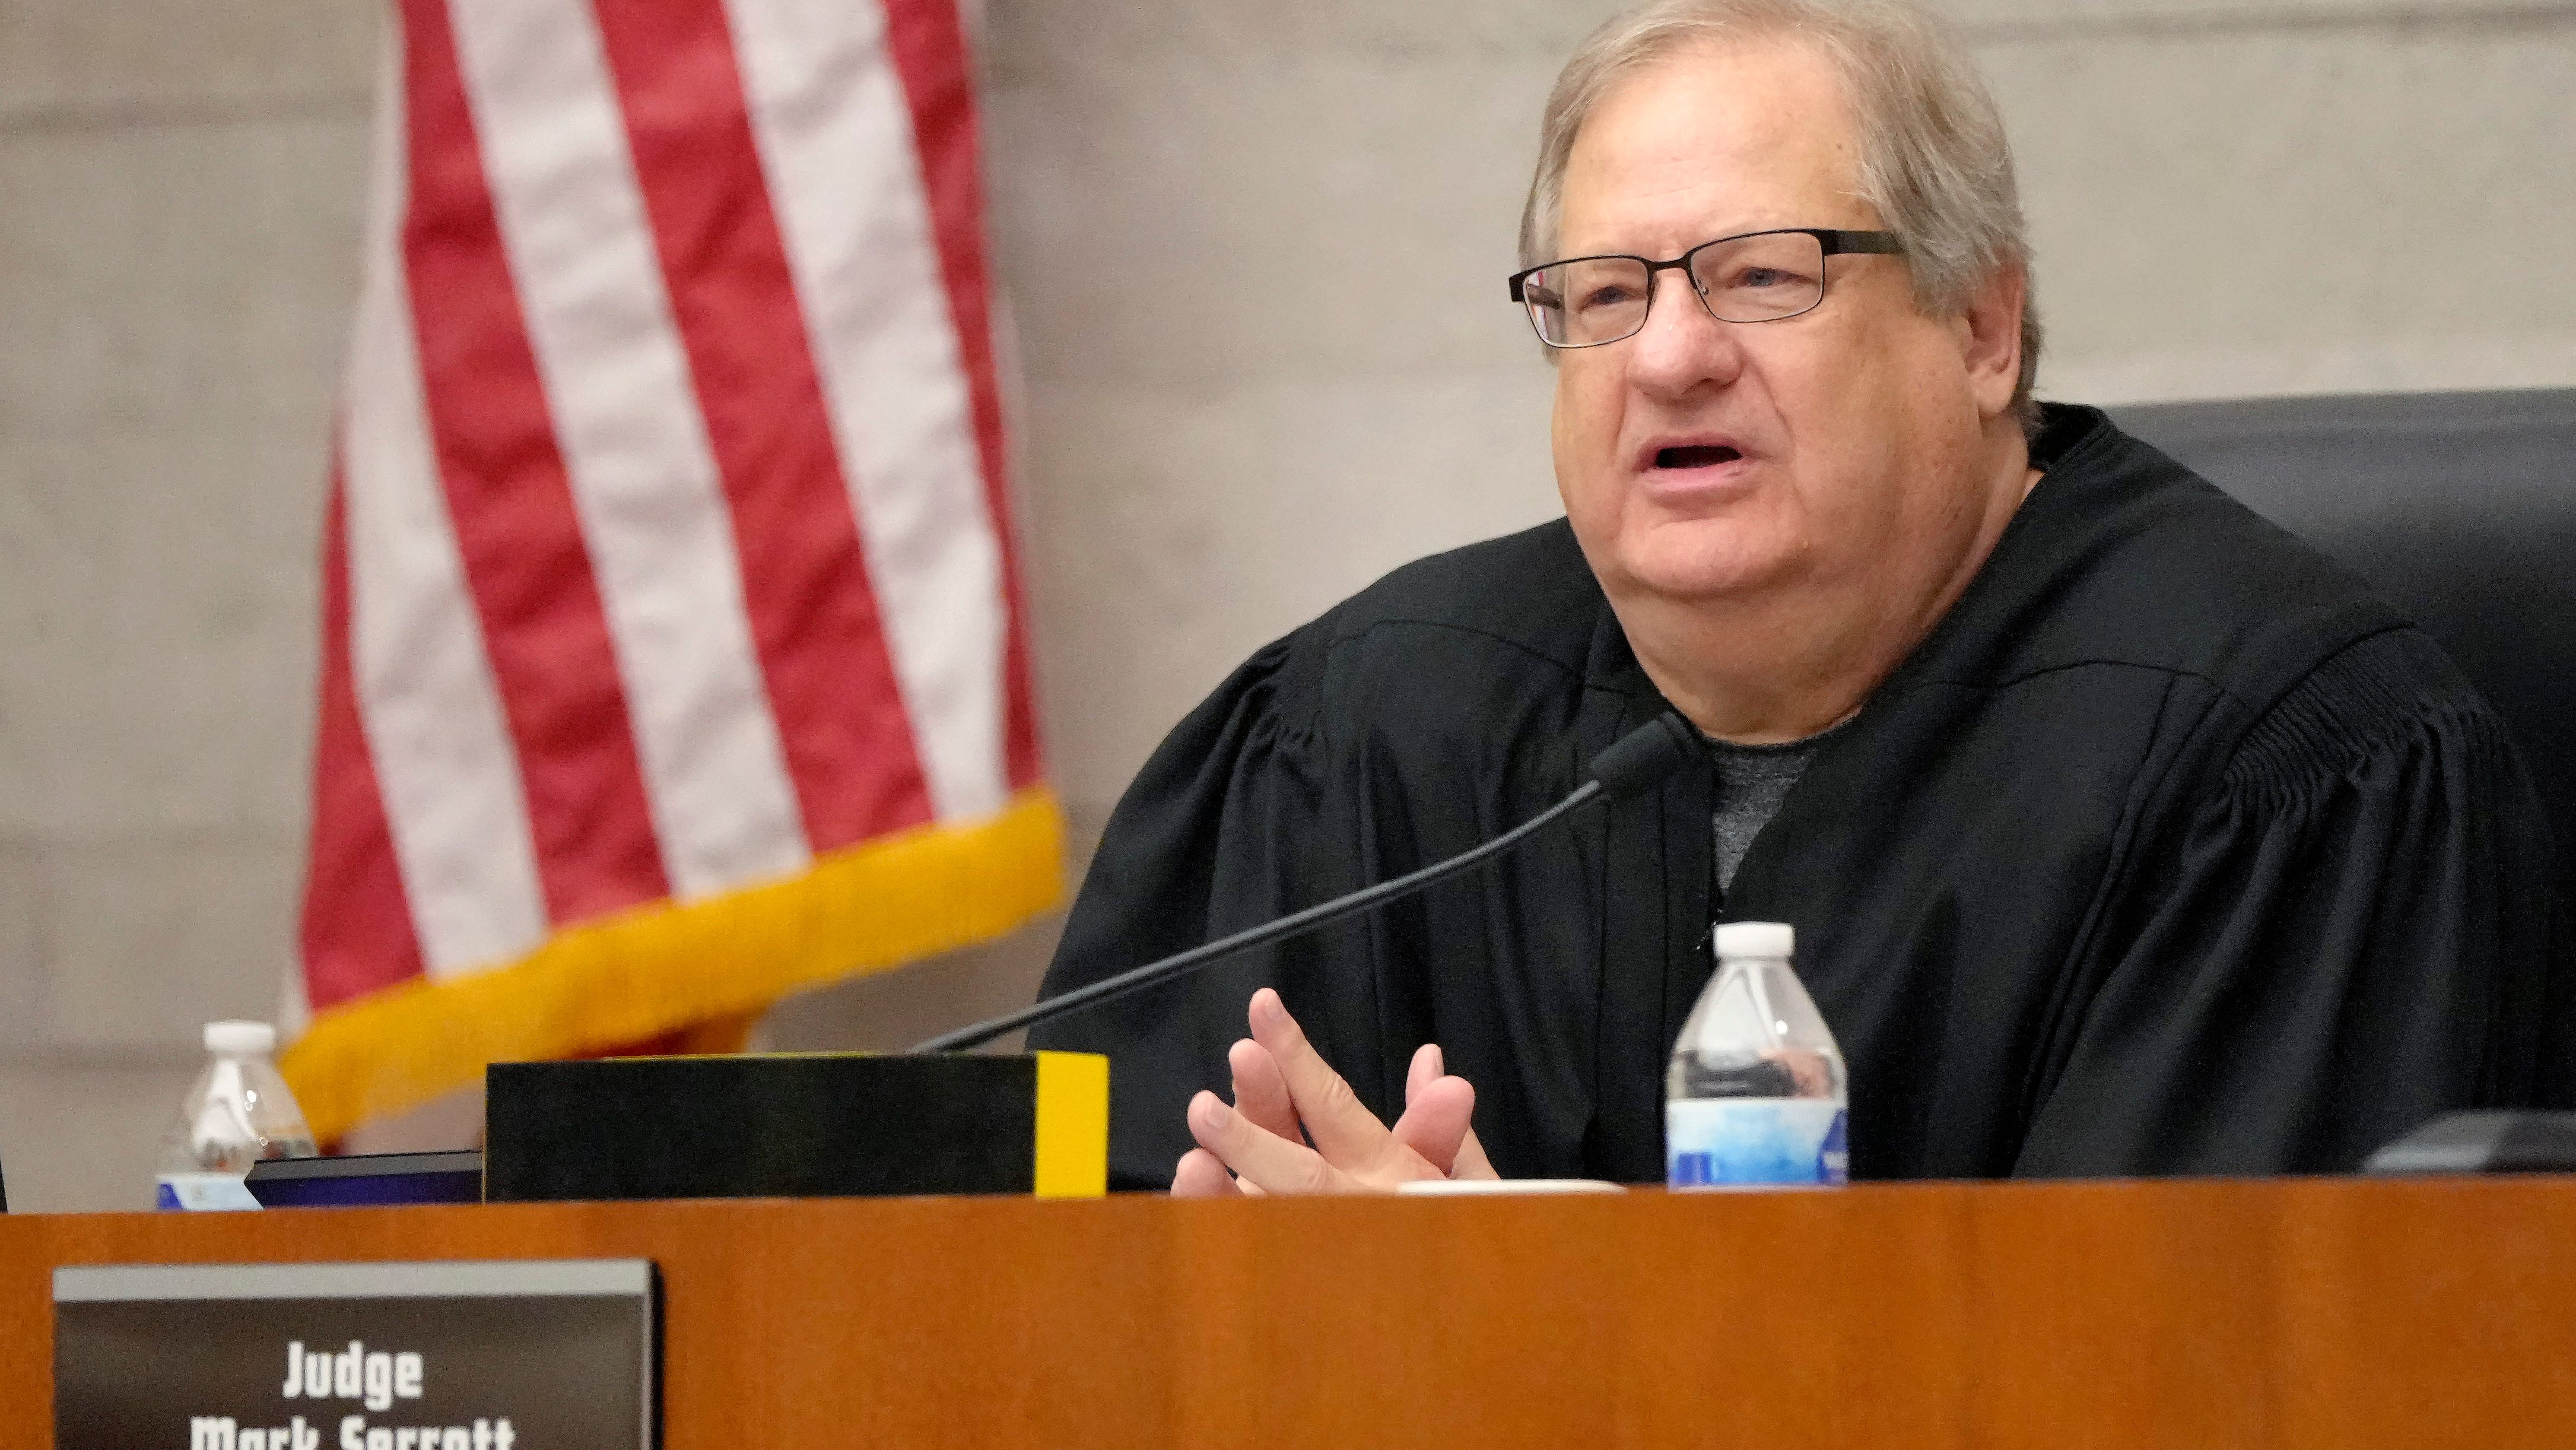 Franklin County judge overturns jury verdict in 'exceptional' case